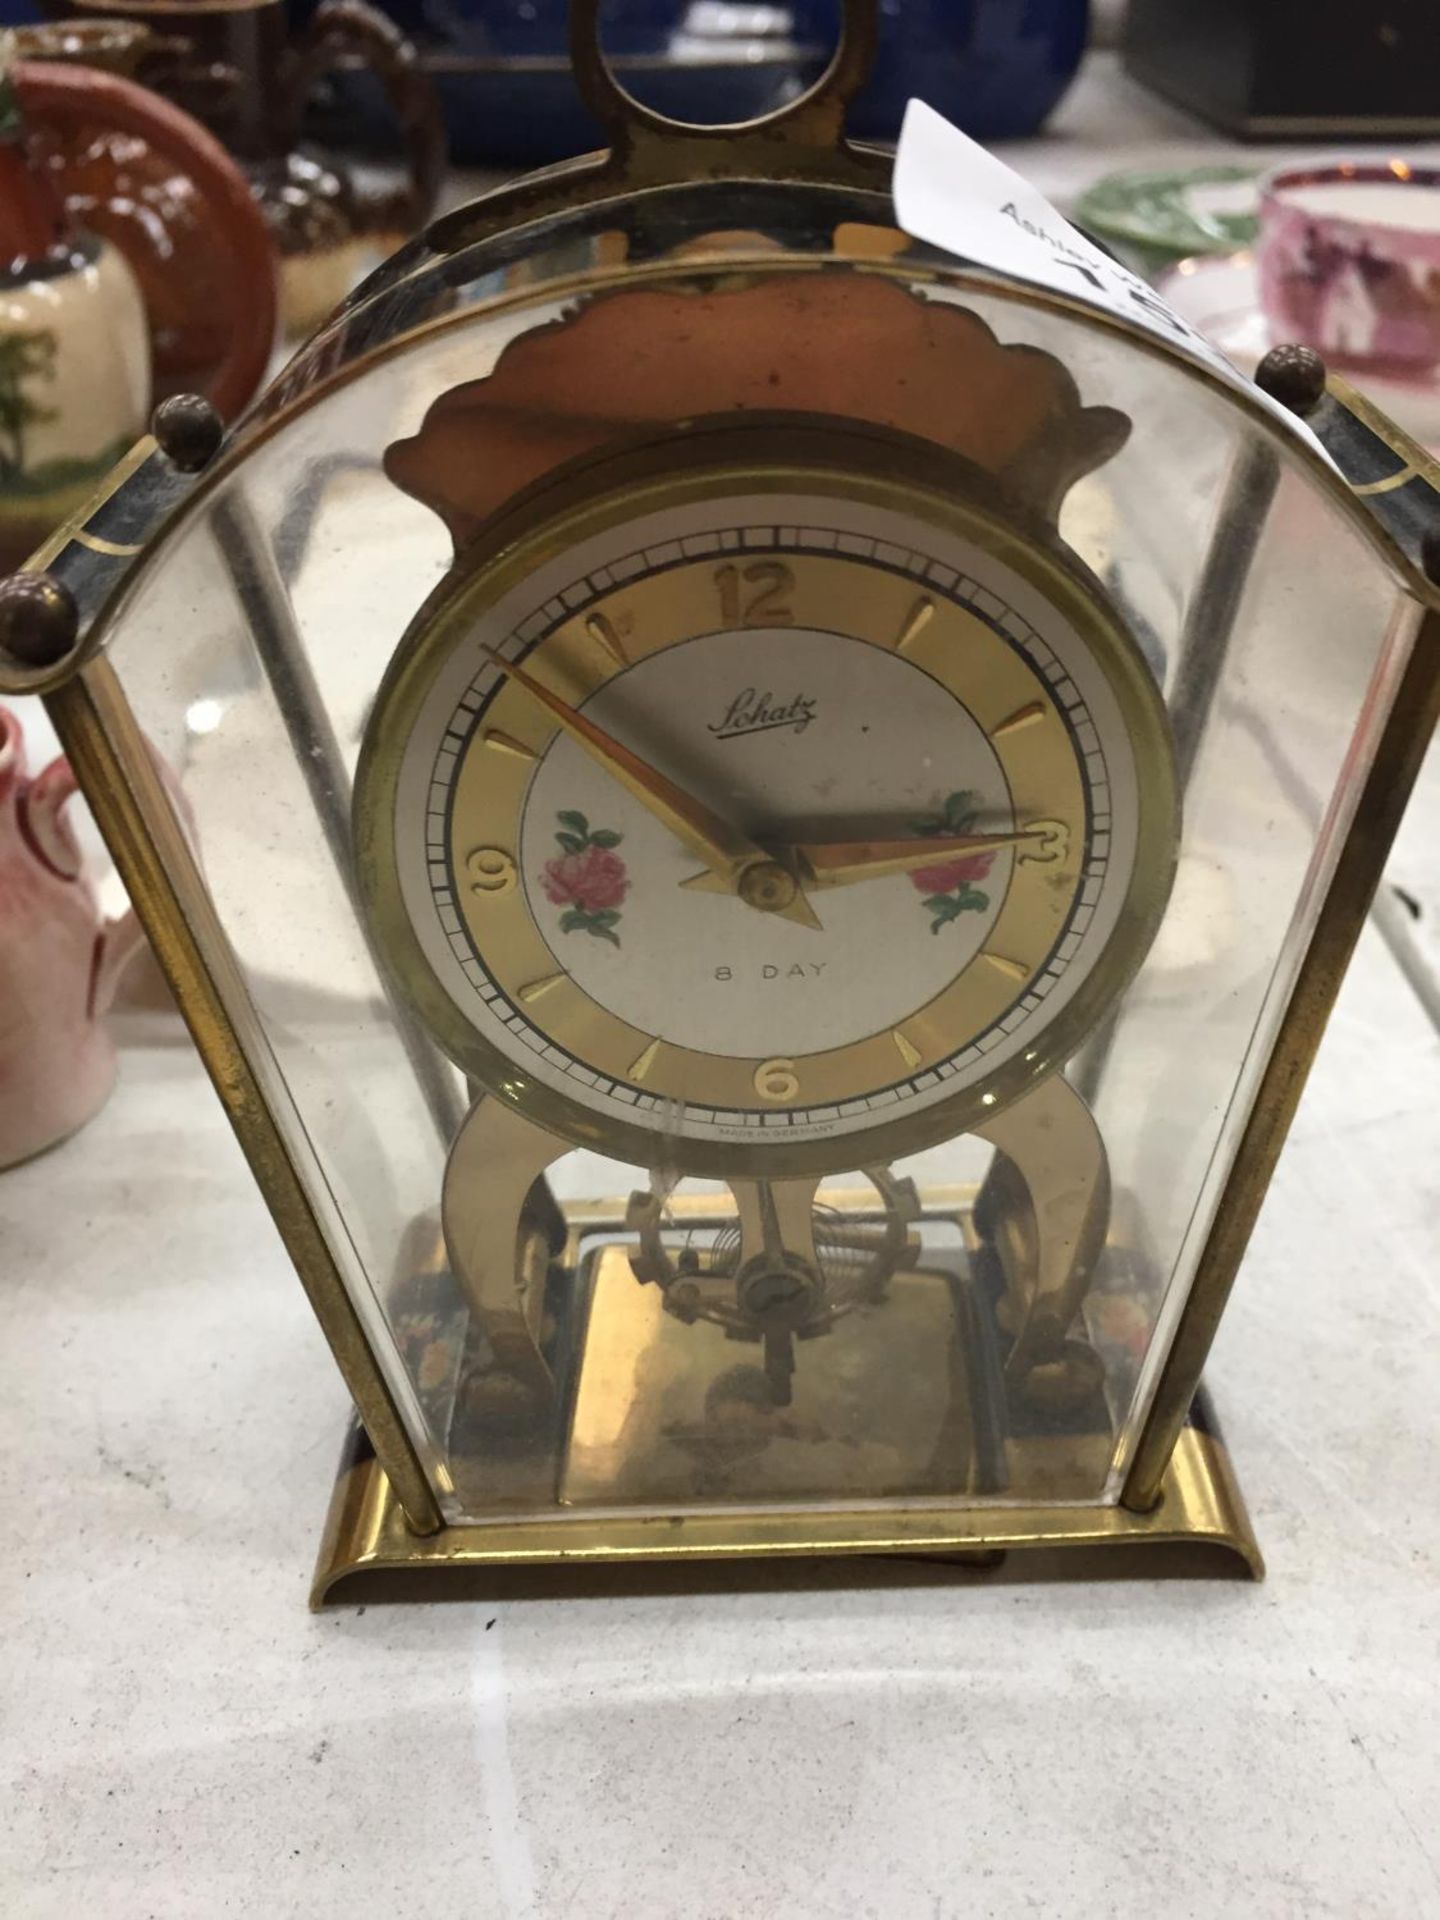 A SMALL GERMAN MANTLE CLOCK WITH FLORAL PATTERN - Image 2 of 4